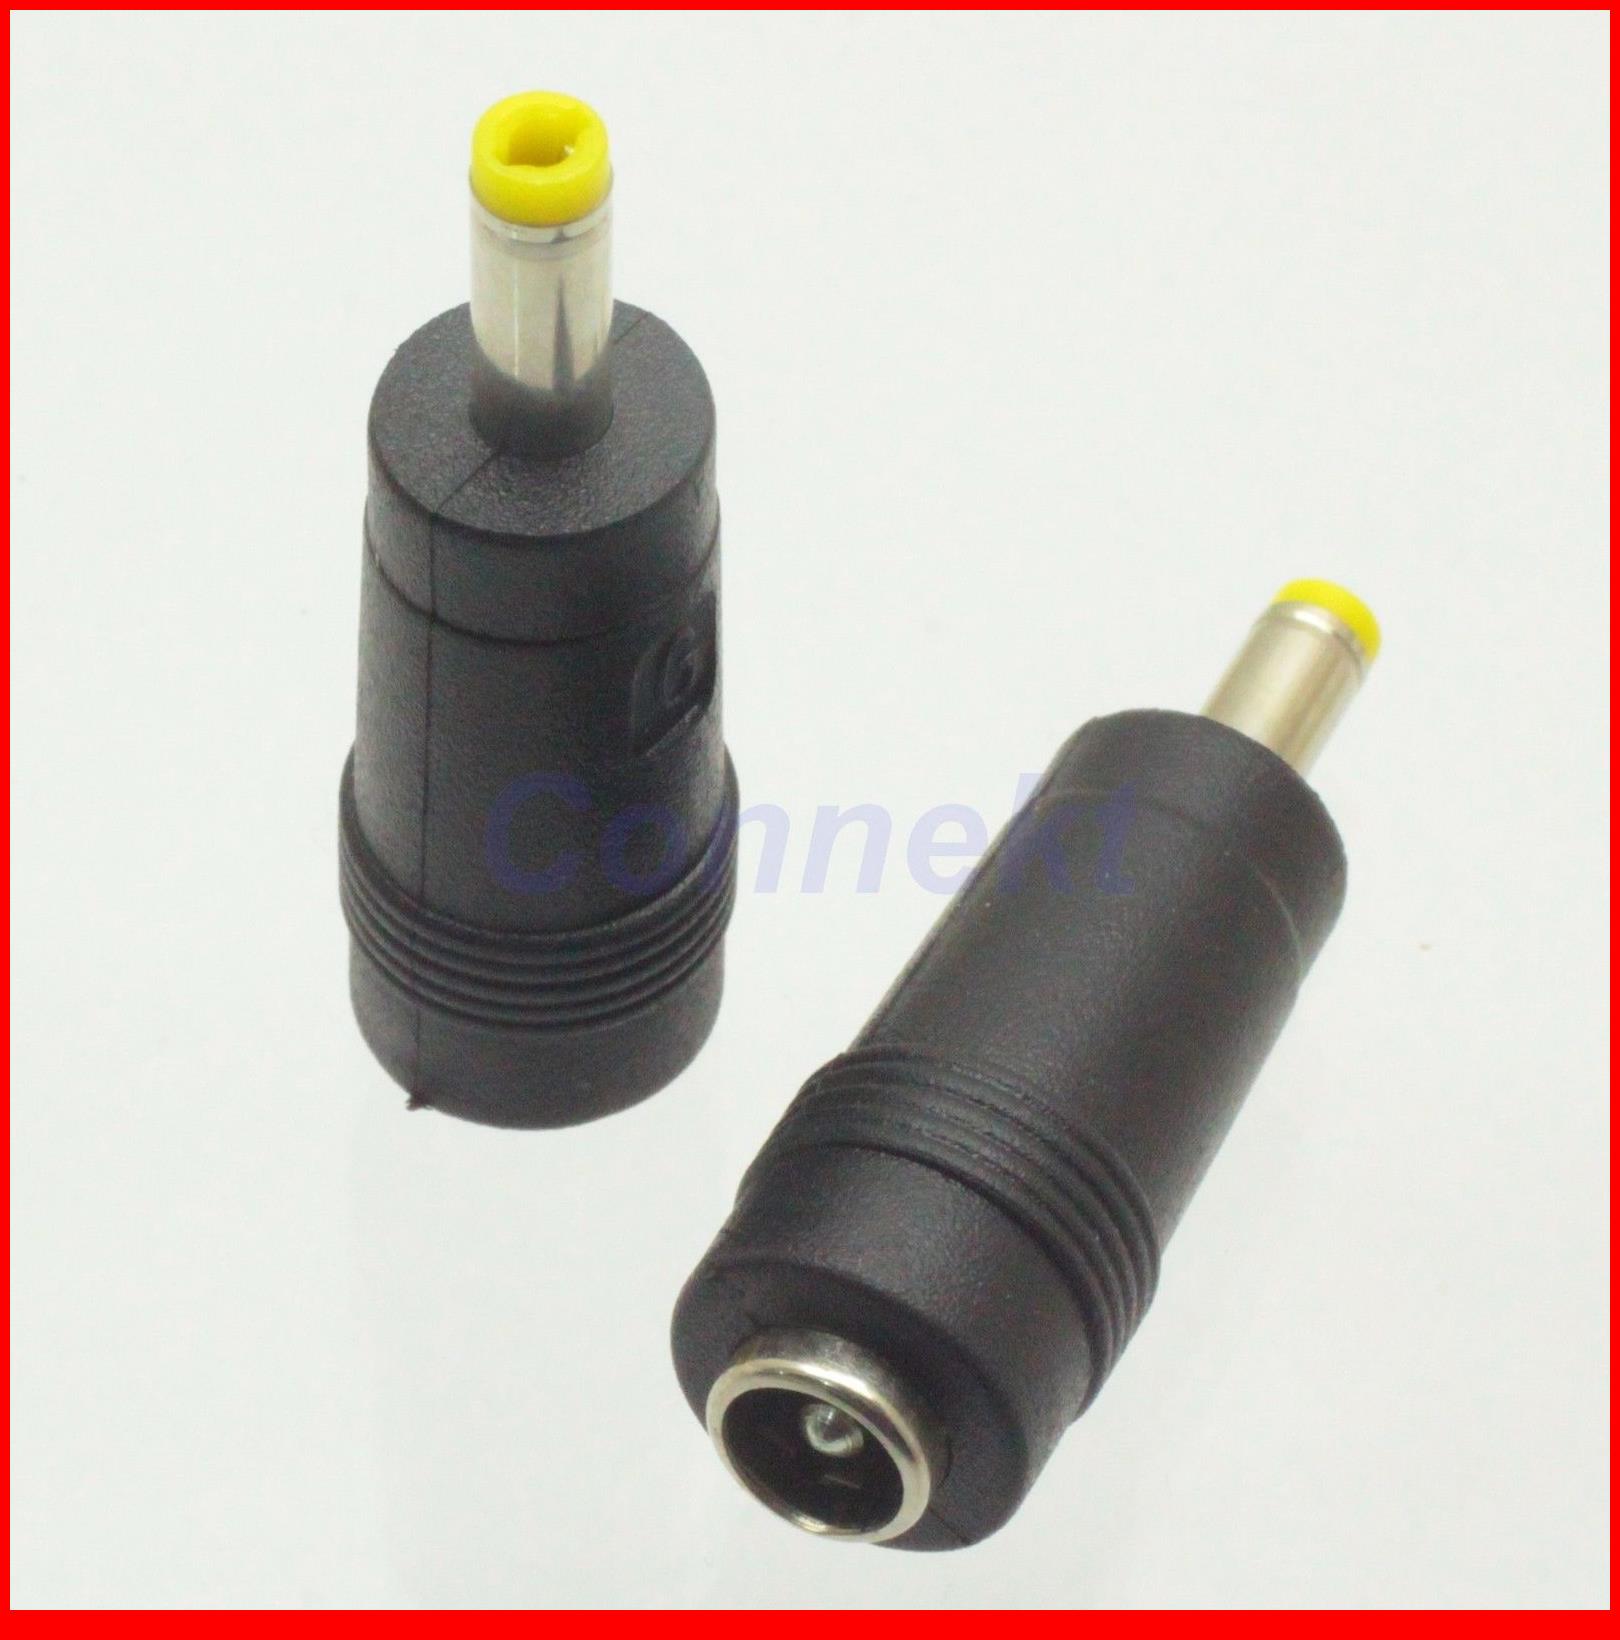 100pcs DC Power 4.0x1.7mm Male Plug to 5.5x2.1mm Female Jack Adapter Connector